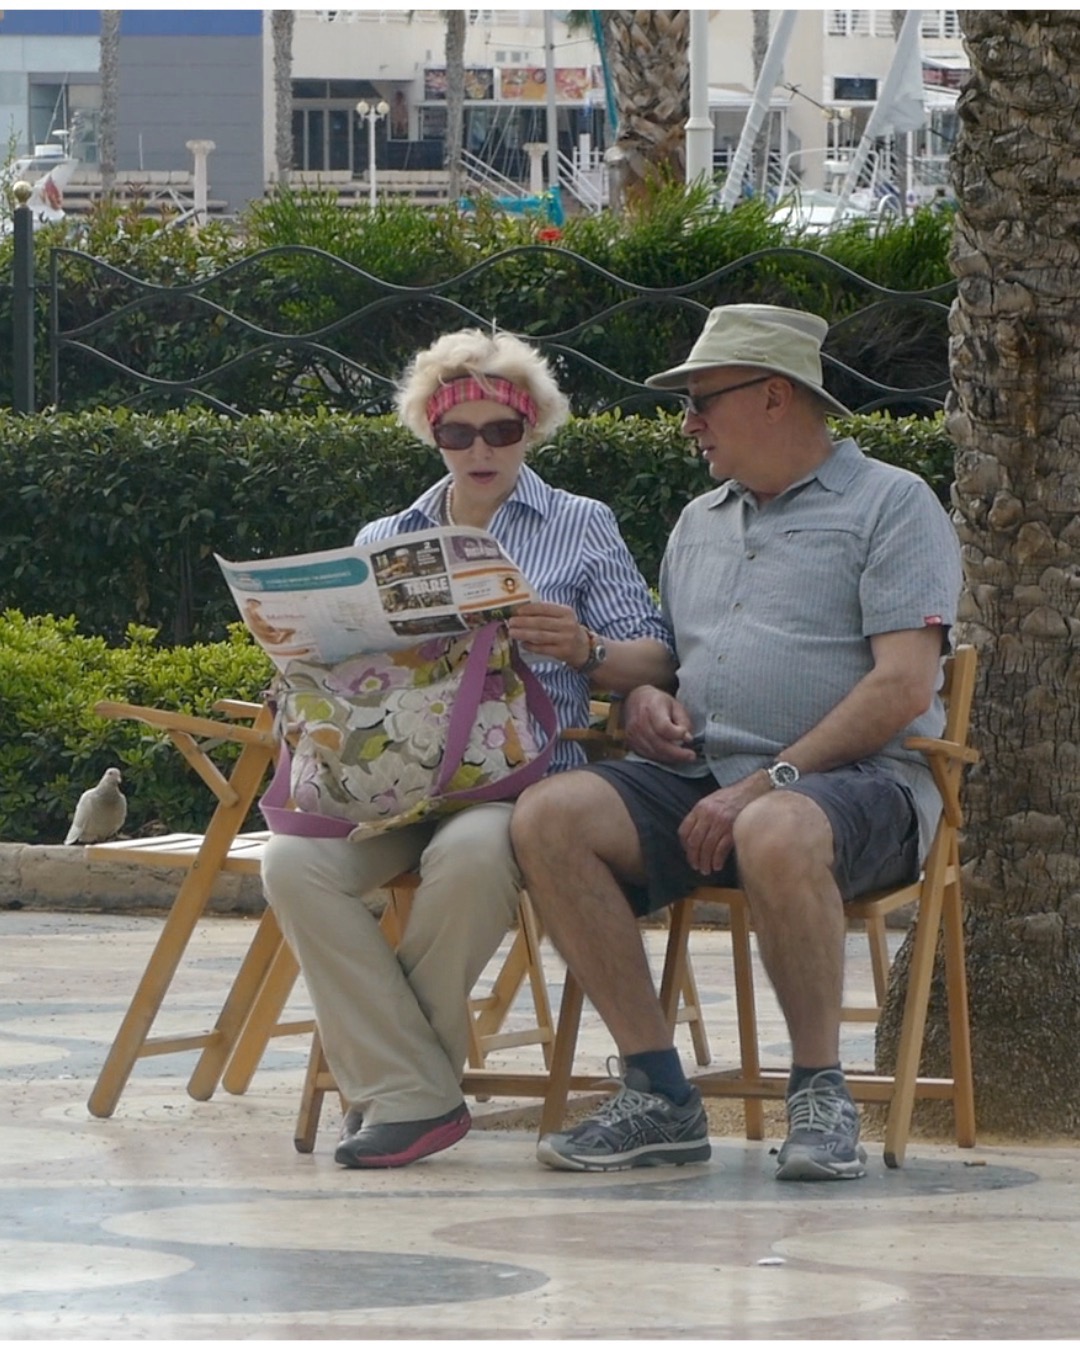 The Alicante City Council has commissioned more than 20 double chairs to meet the demand of users in the face of the arrival of good weather.